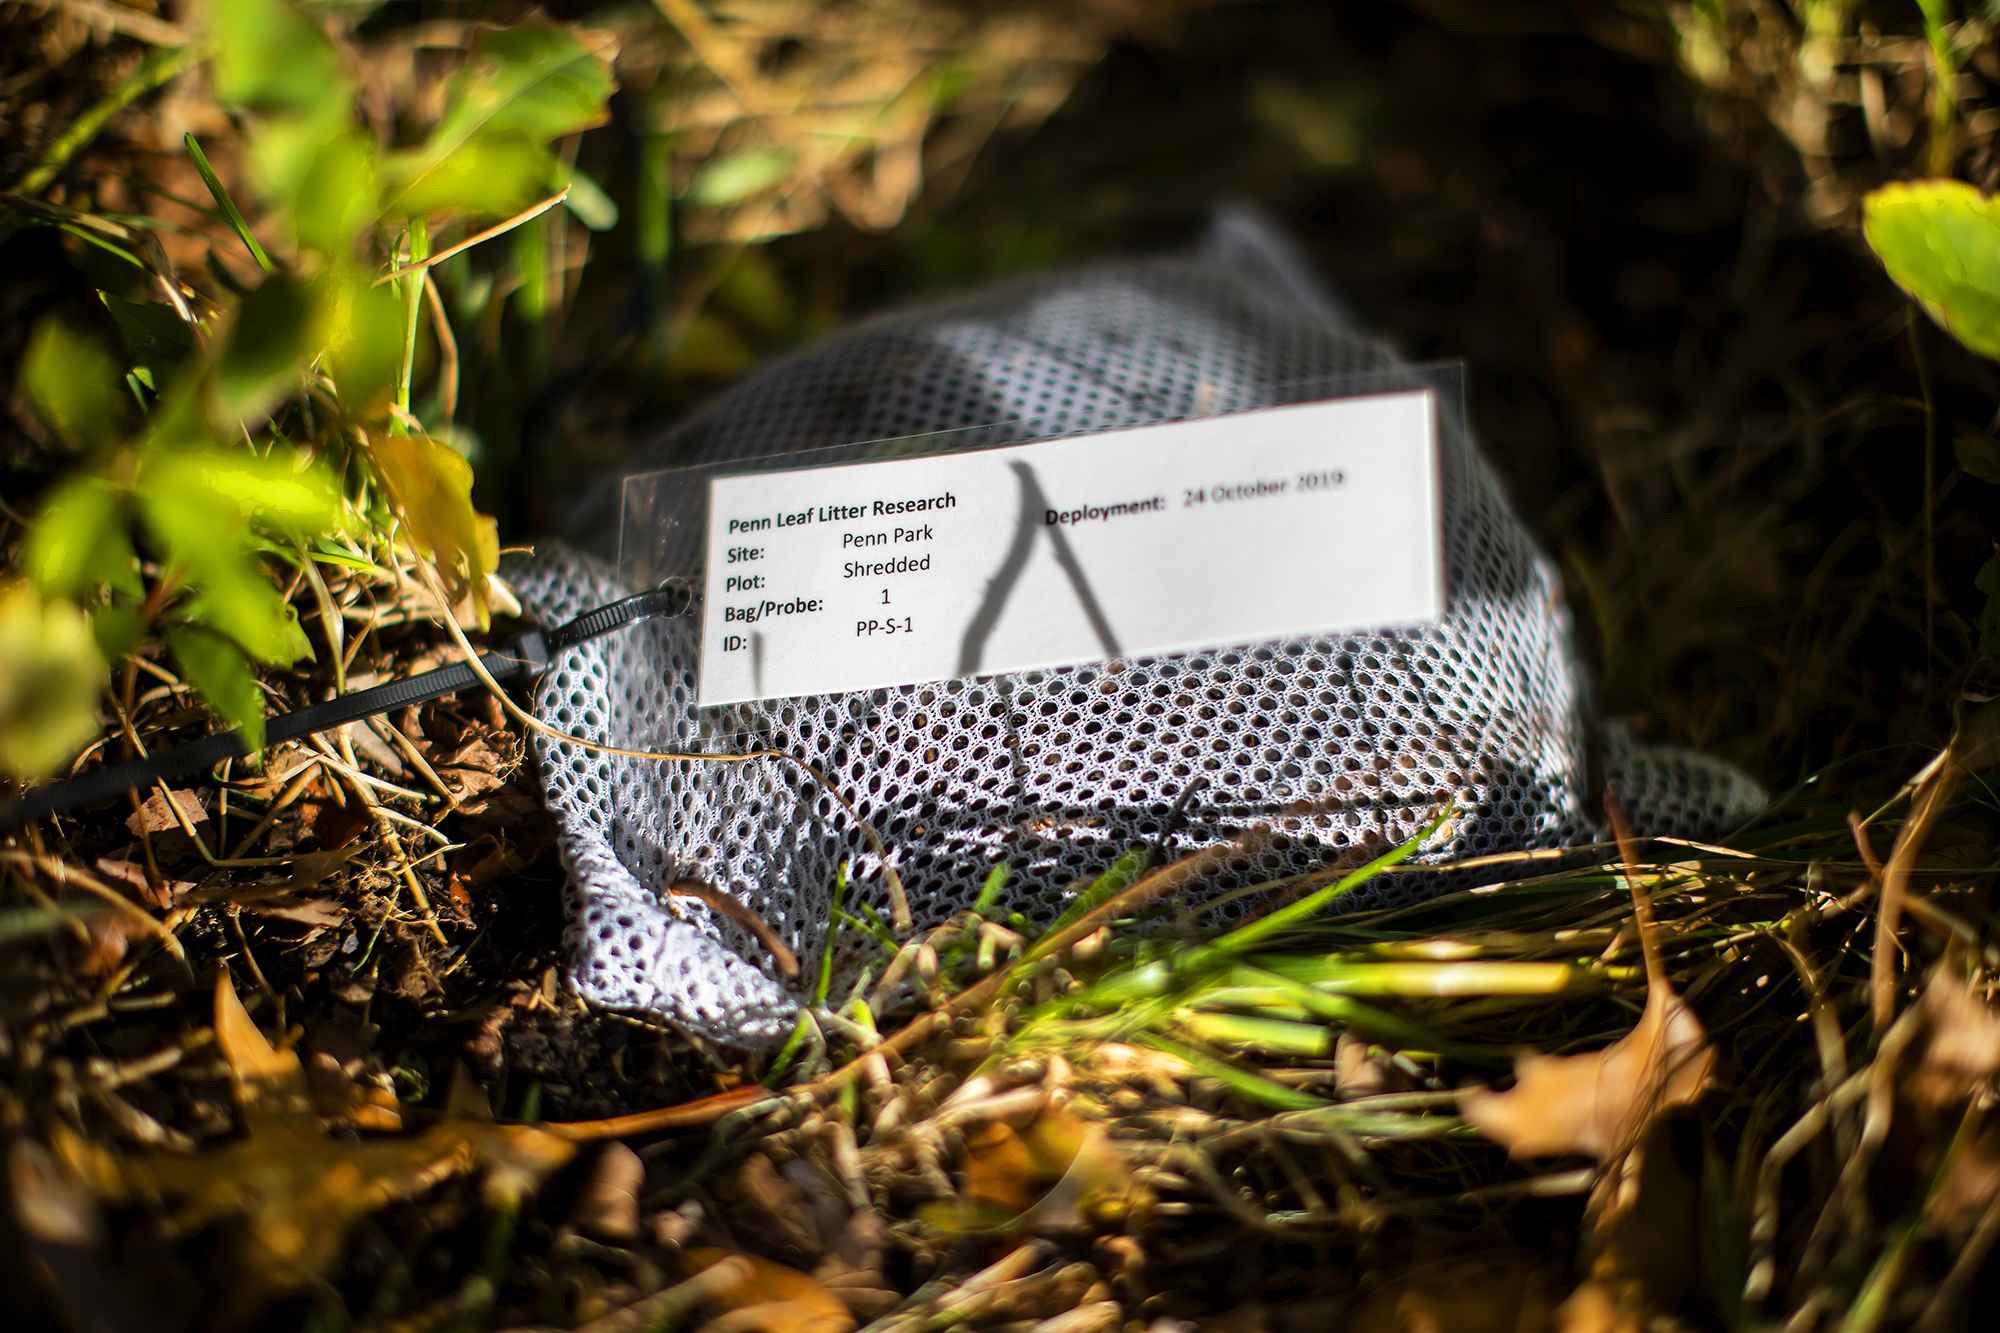 Mesh bag nestled in leaves with a tag reading "Penn Leaf Litter Research" and other scientific information